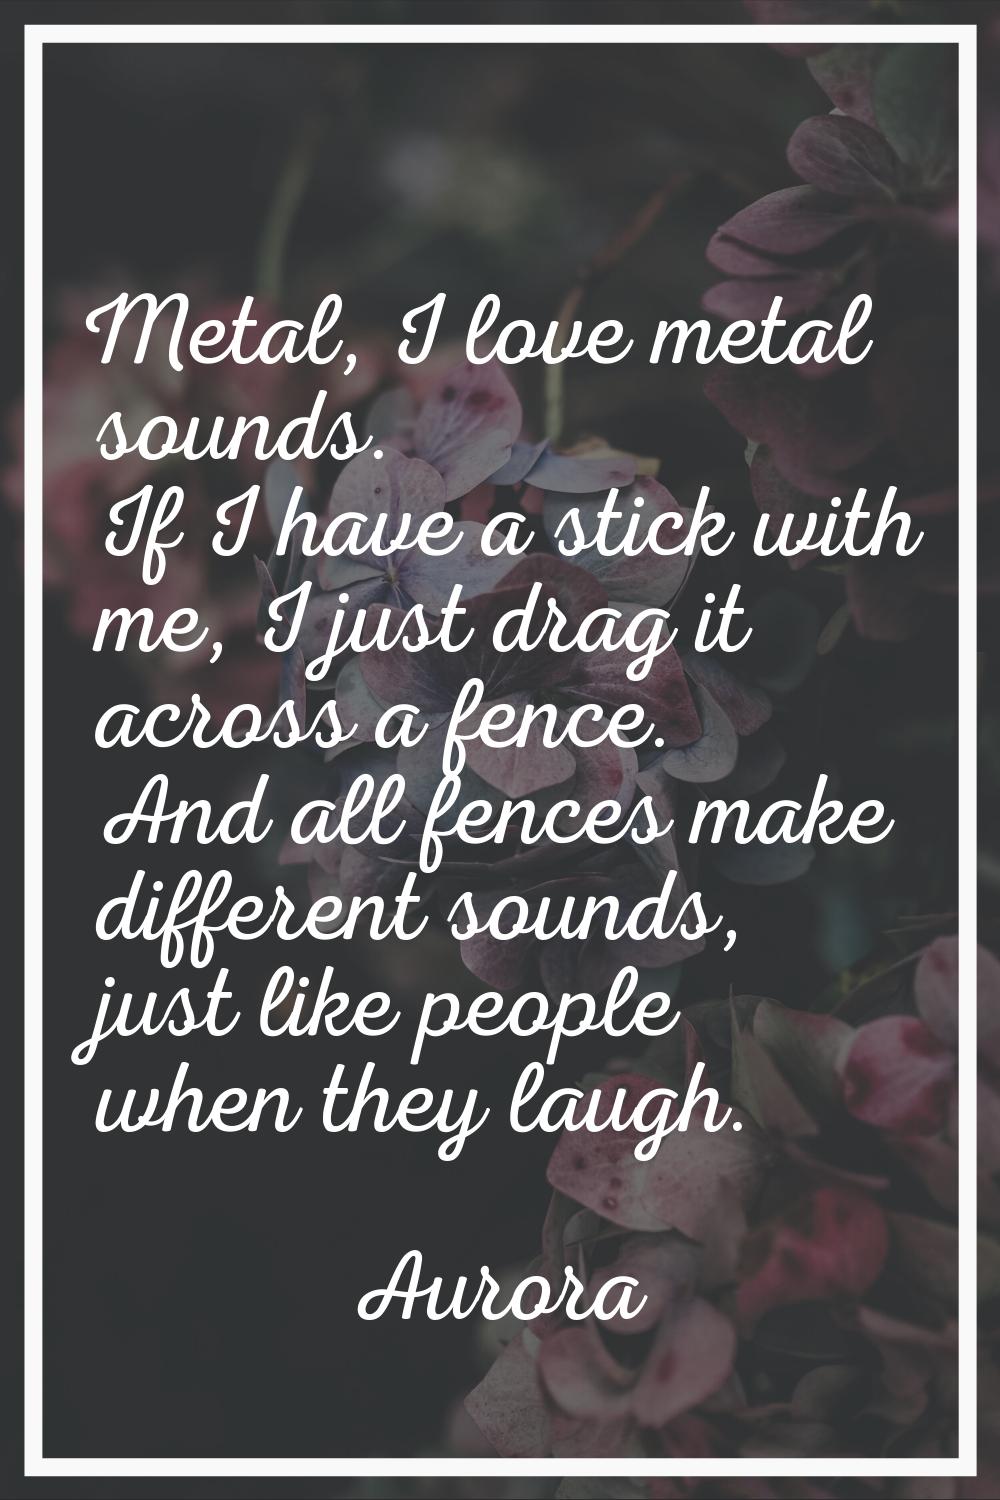 Metal, I love metal sounds. If I have a stick with me, I just drag it across a fence. And all fence